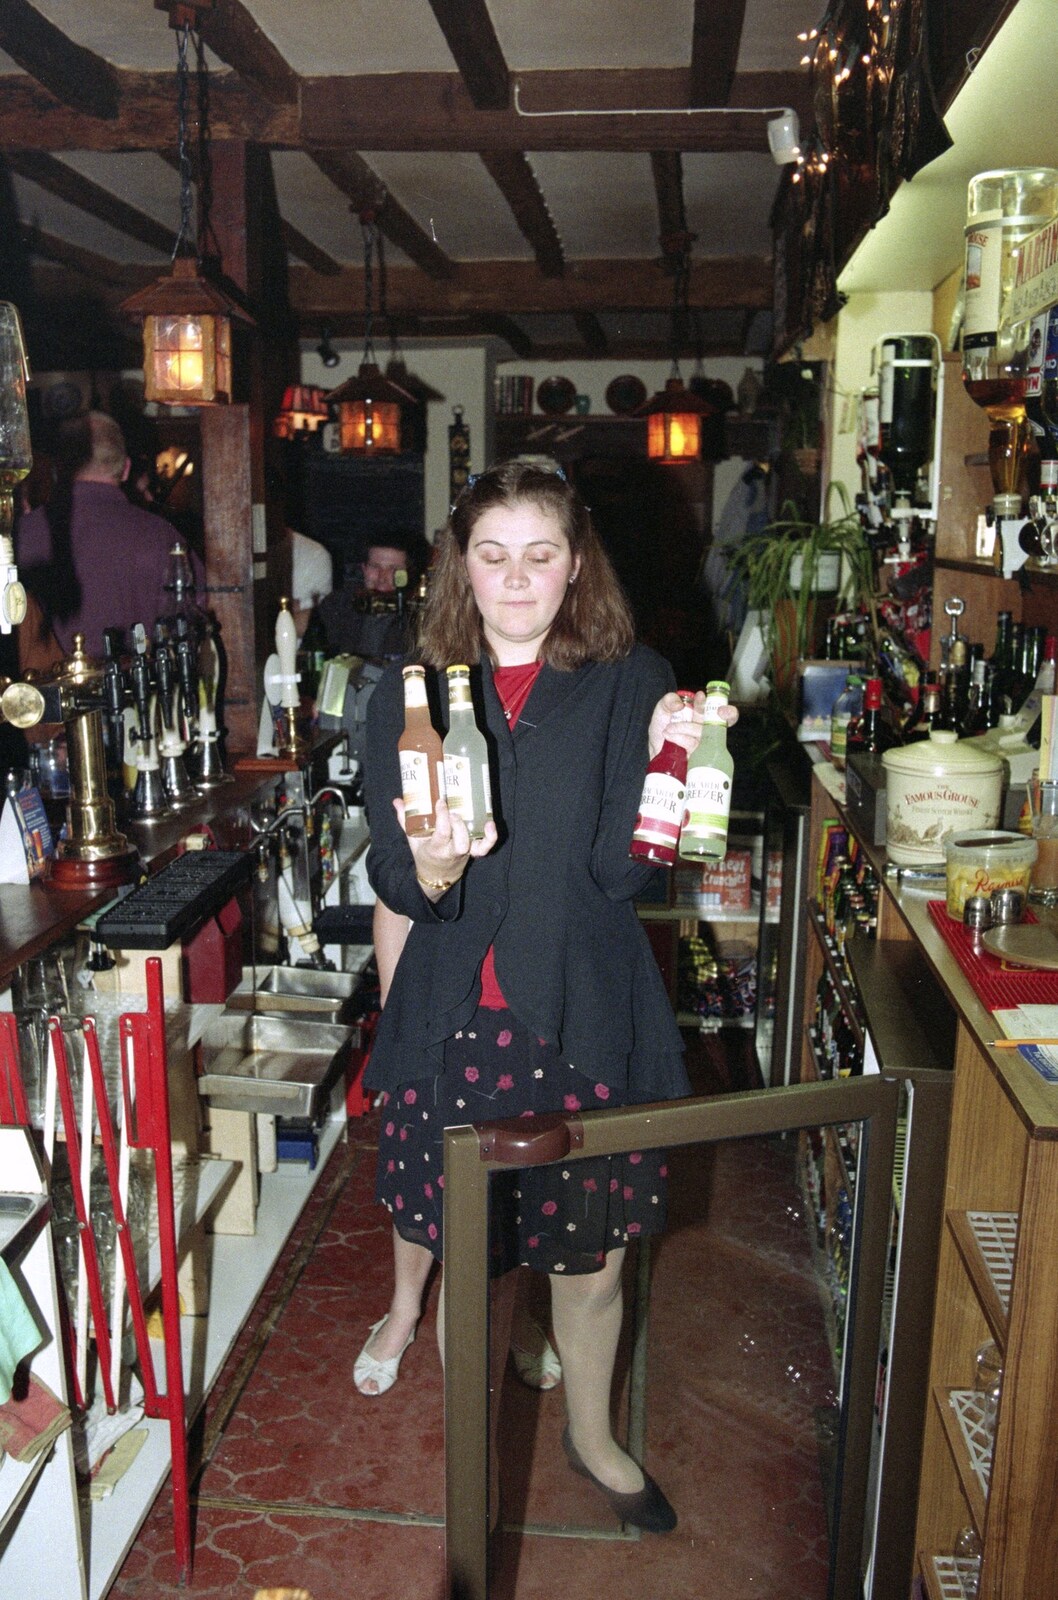 Claire armed with bottles from Wavy's Thirtieth Birthday, The Swan Inn, Brome, Suffolk - 24th May 2000